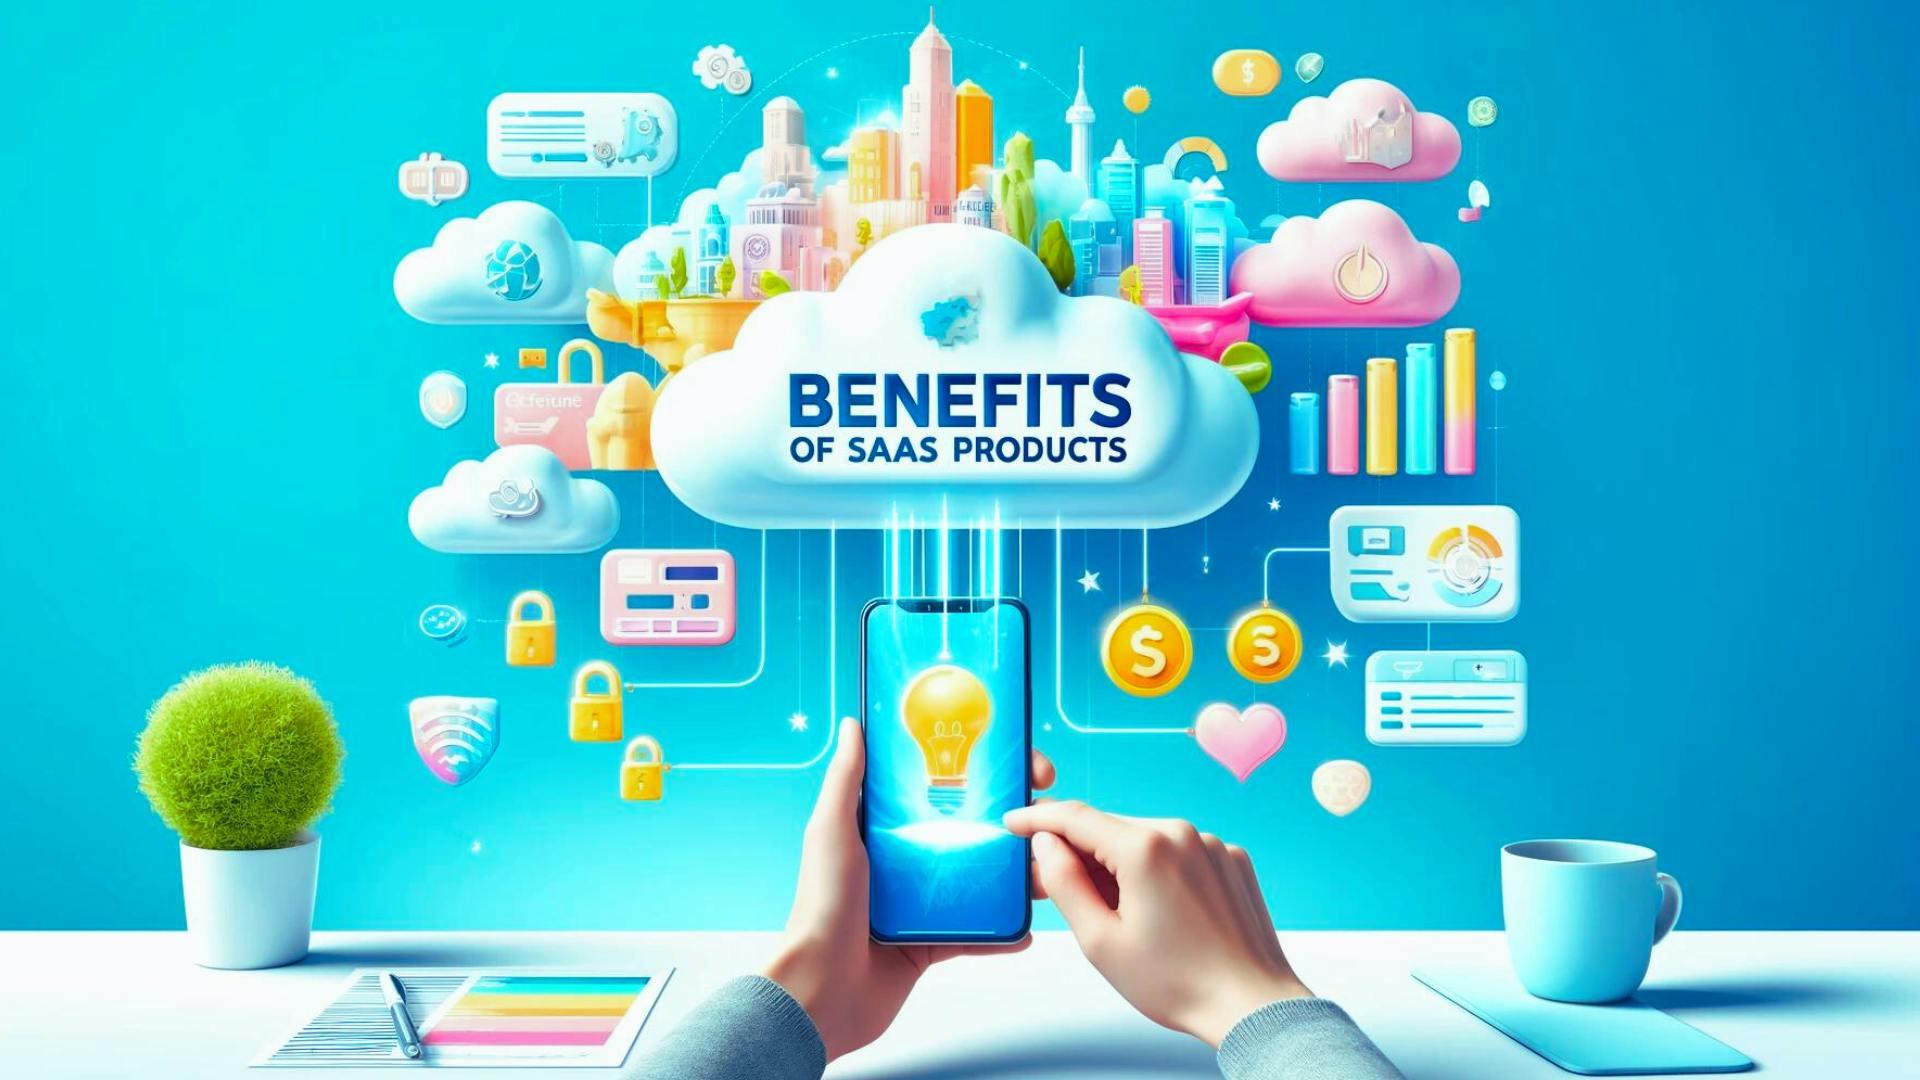 Benefits of saas products 